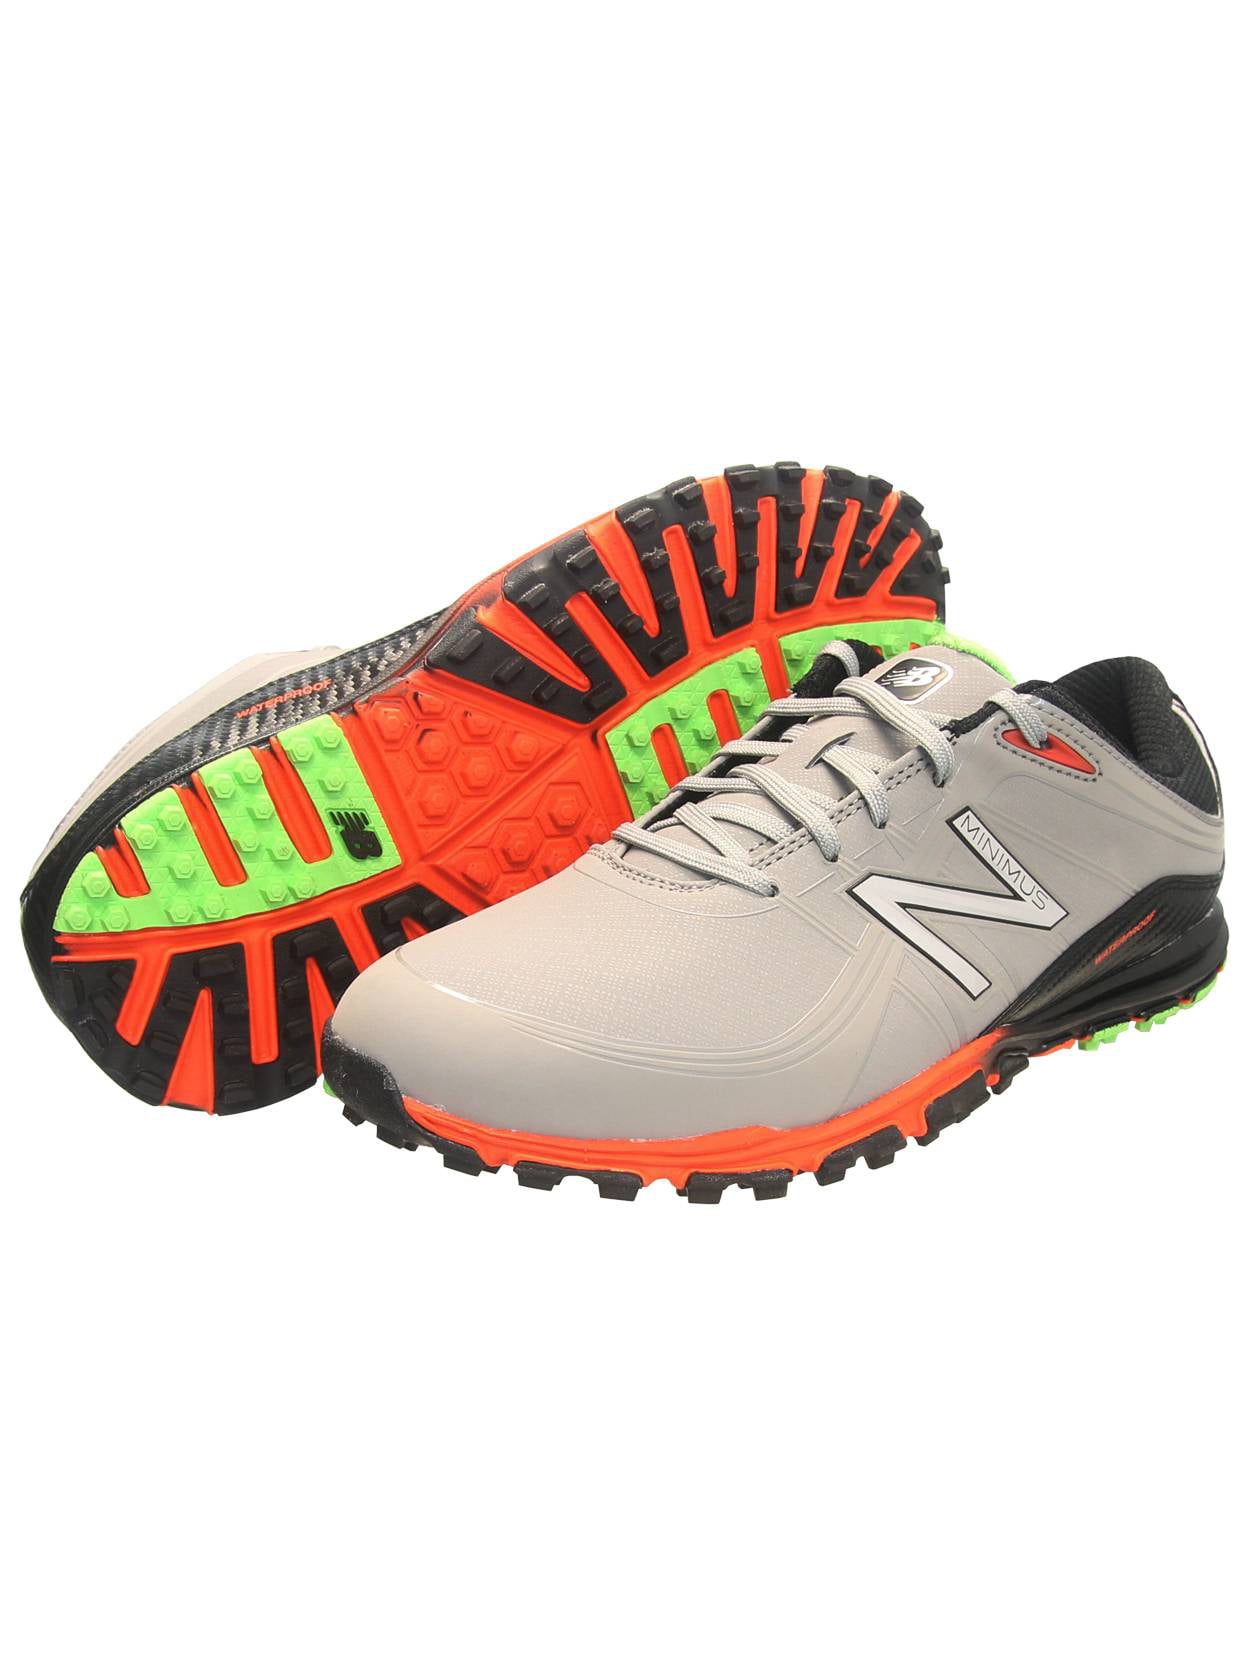 Buy > men's new balance spikeless golf shoes > in stock